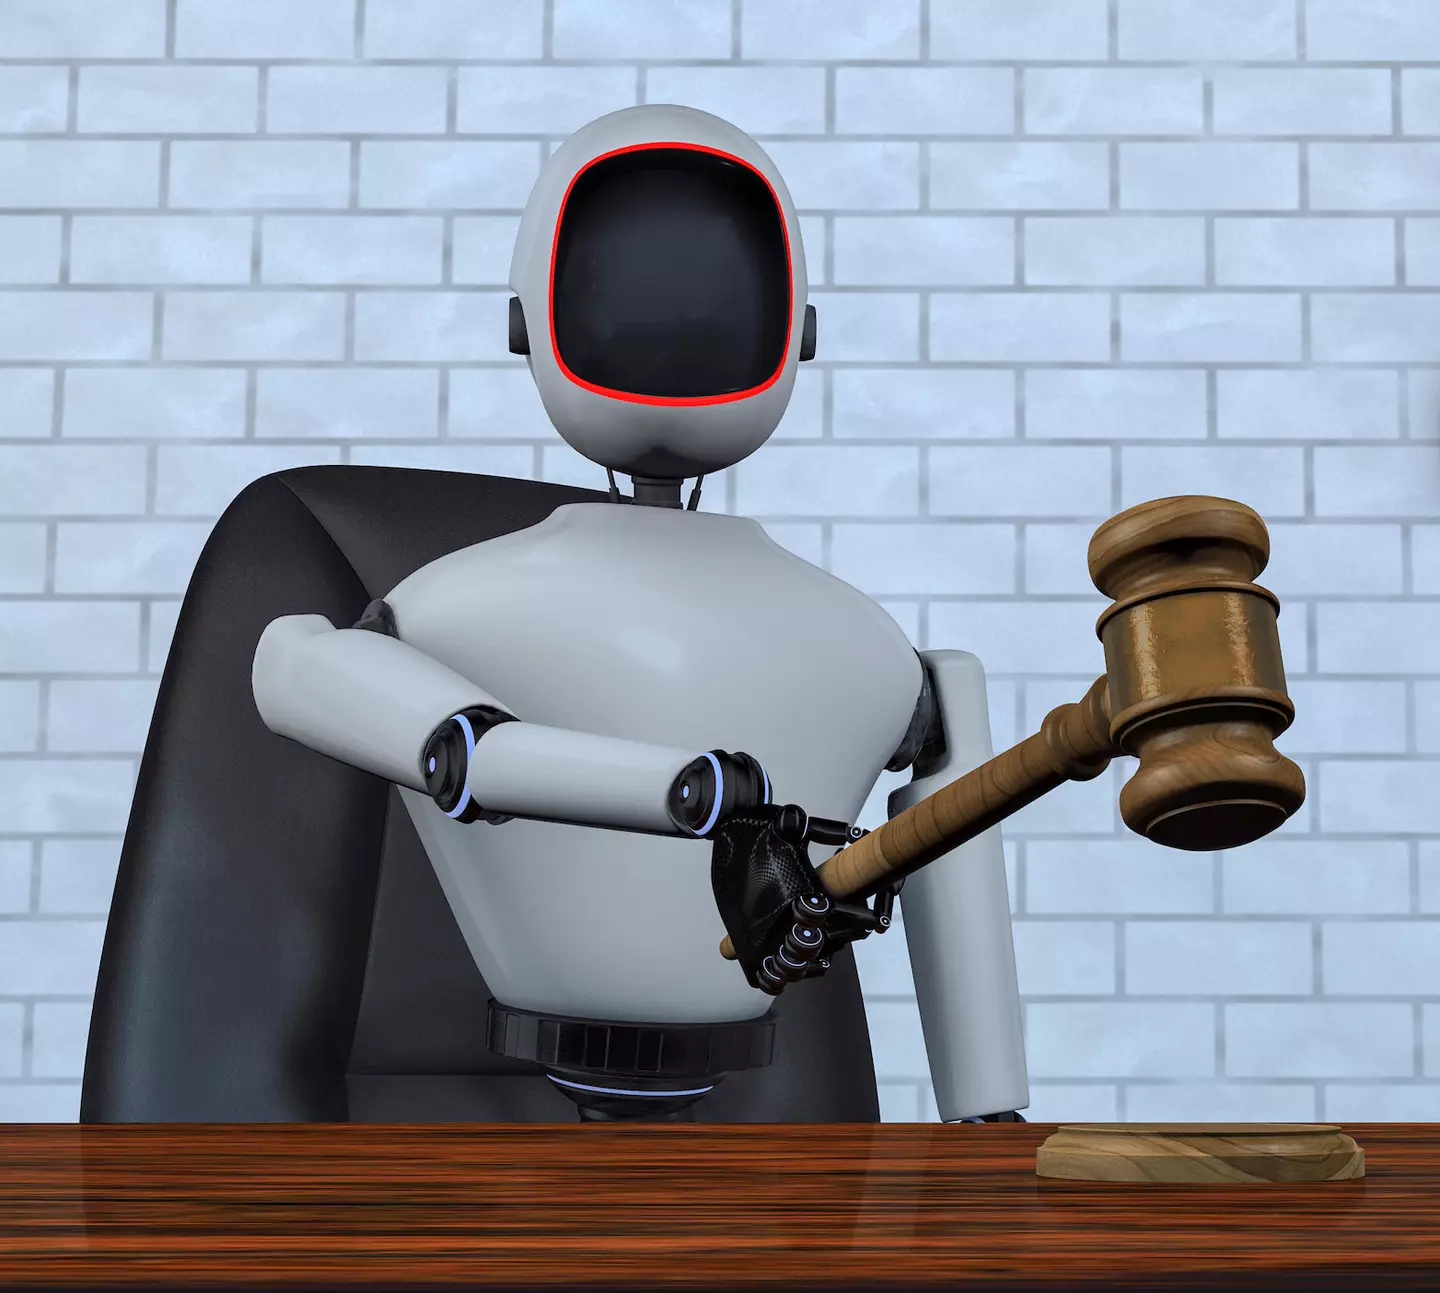 The Edelson firm sued the robot due to an 'unauthorized practice of law'.